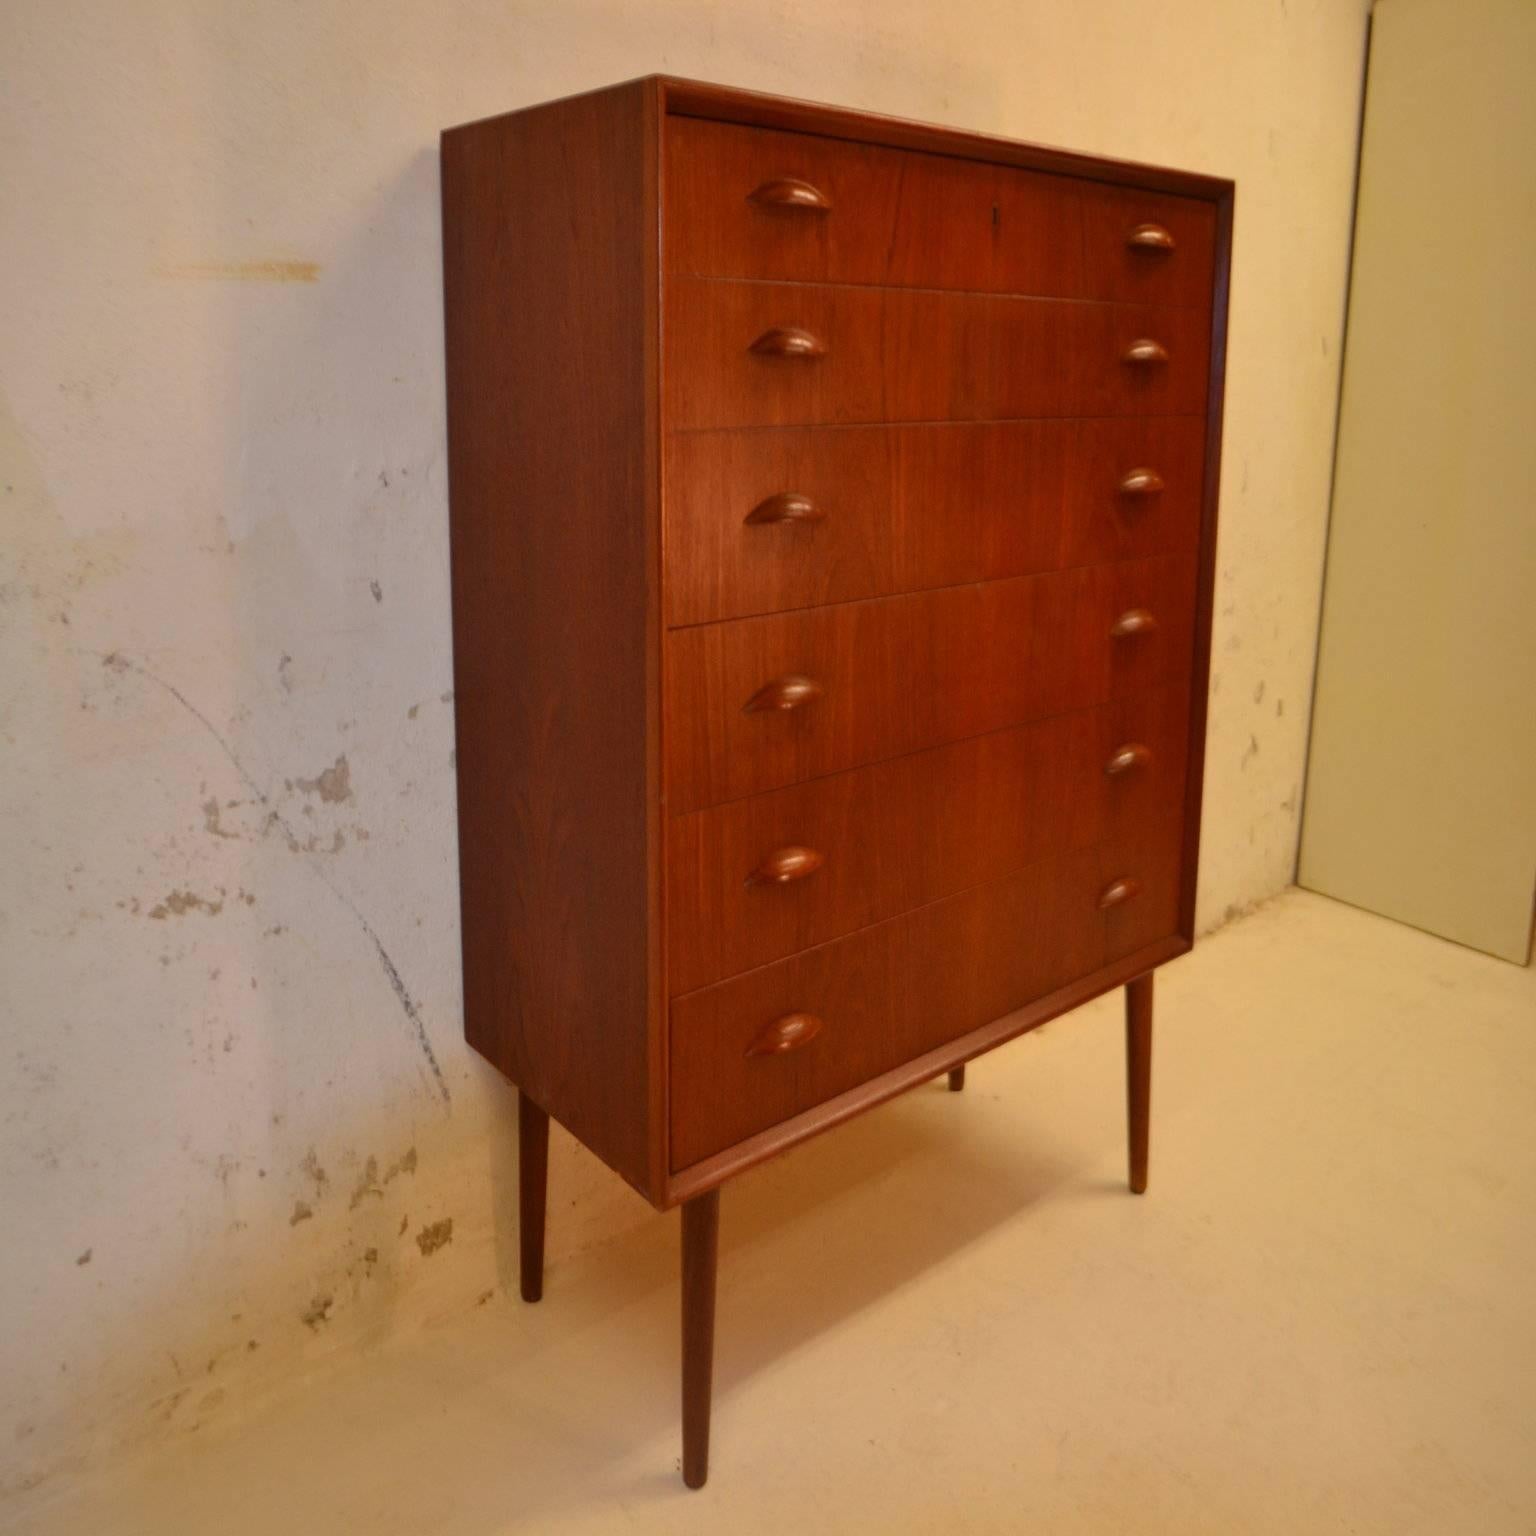 Danish teak chest of drawers designed by Kai Kristiansen, Denmark.

The chest has six drawers with elegant shaped wooden handles.

Free UK Mainland delivery.

Worldwide shipping available - please contact us for a quote.